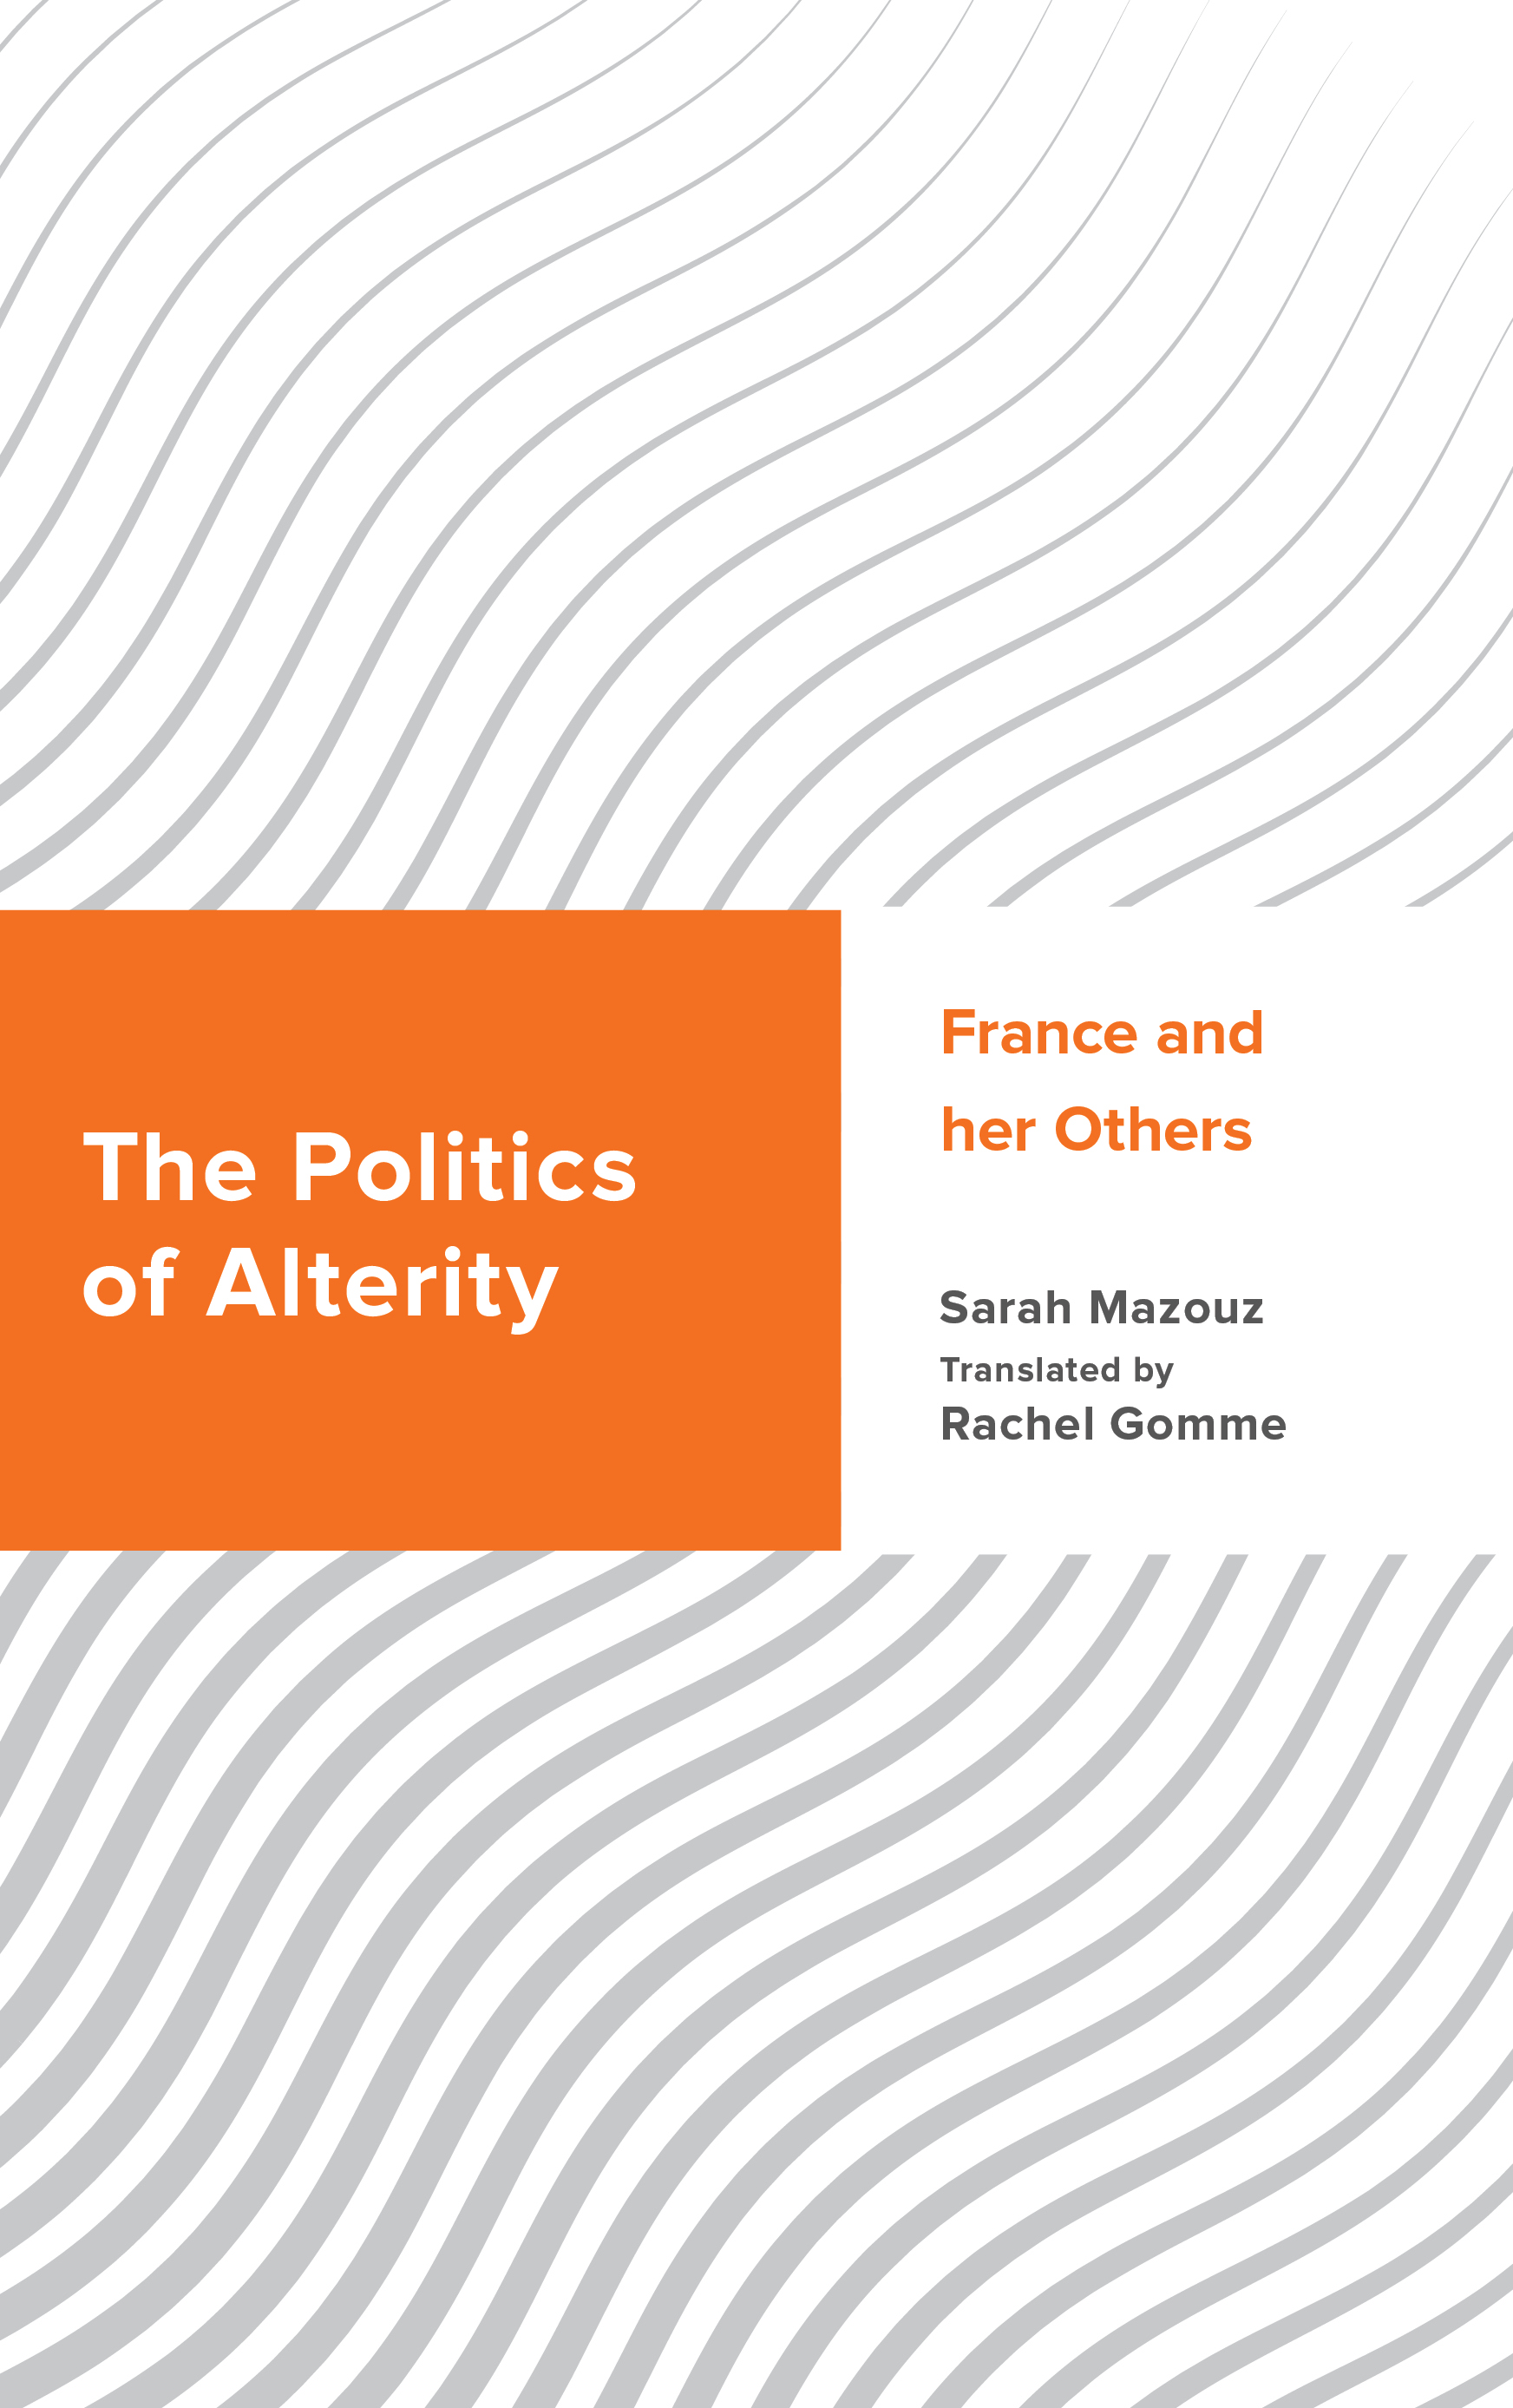 The Politics of Alterity: France and her Others